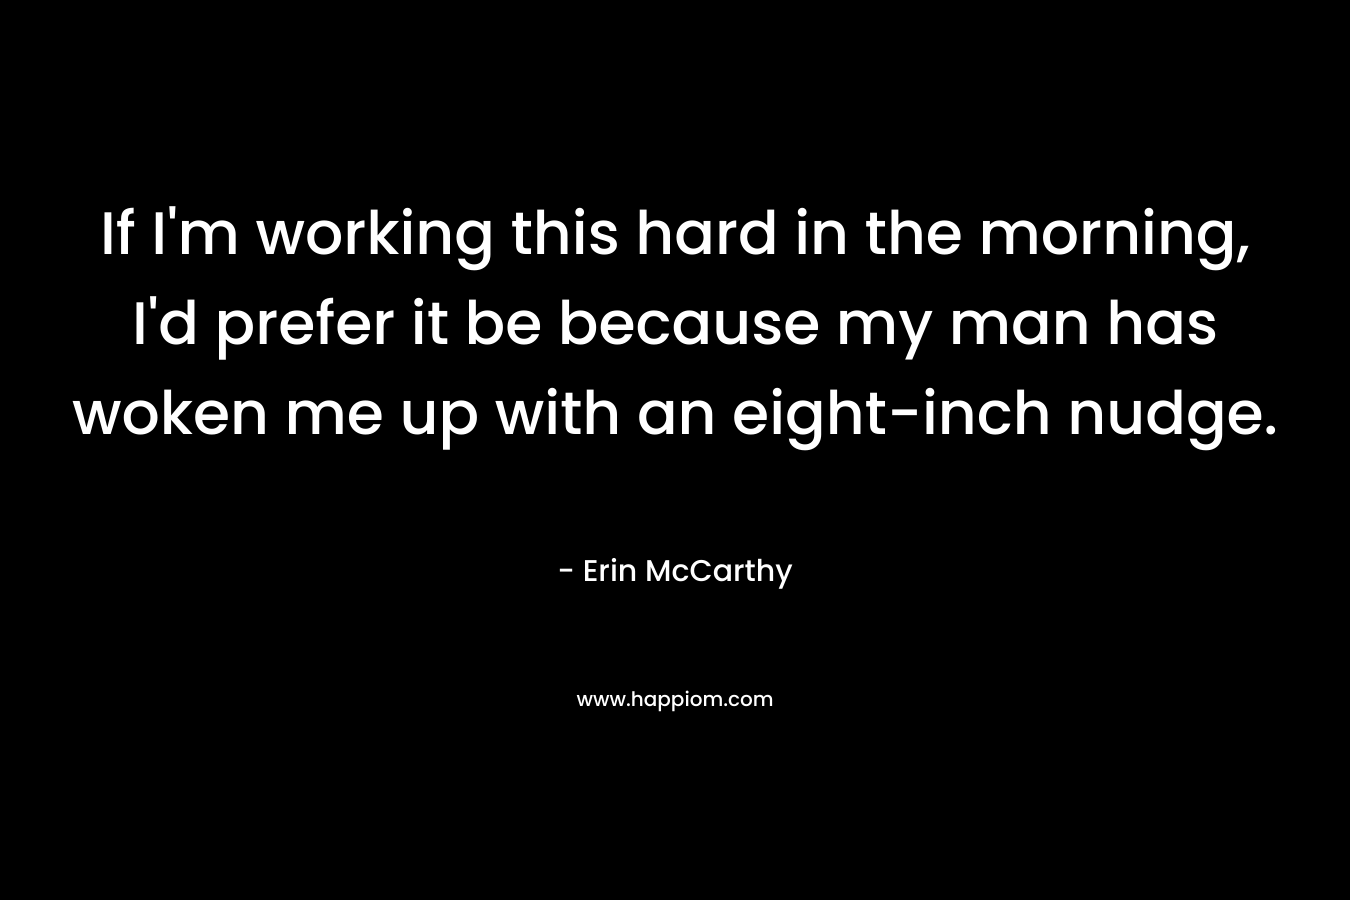 If I’m working this hard in the morning, I’d prefer it be because my man has woken me up with an eight-inch nudge. – Erin McCarthy